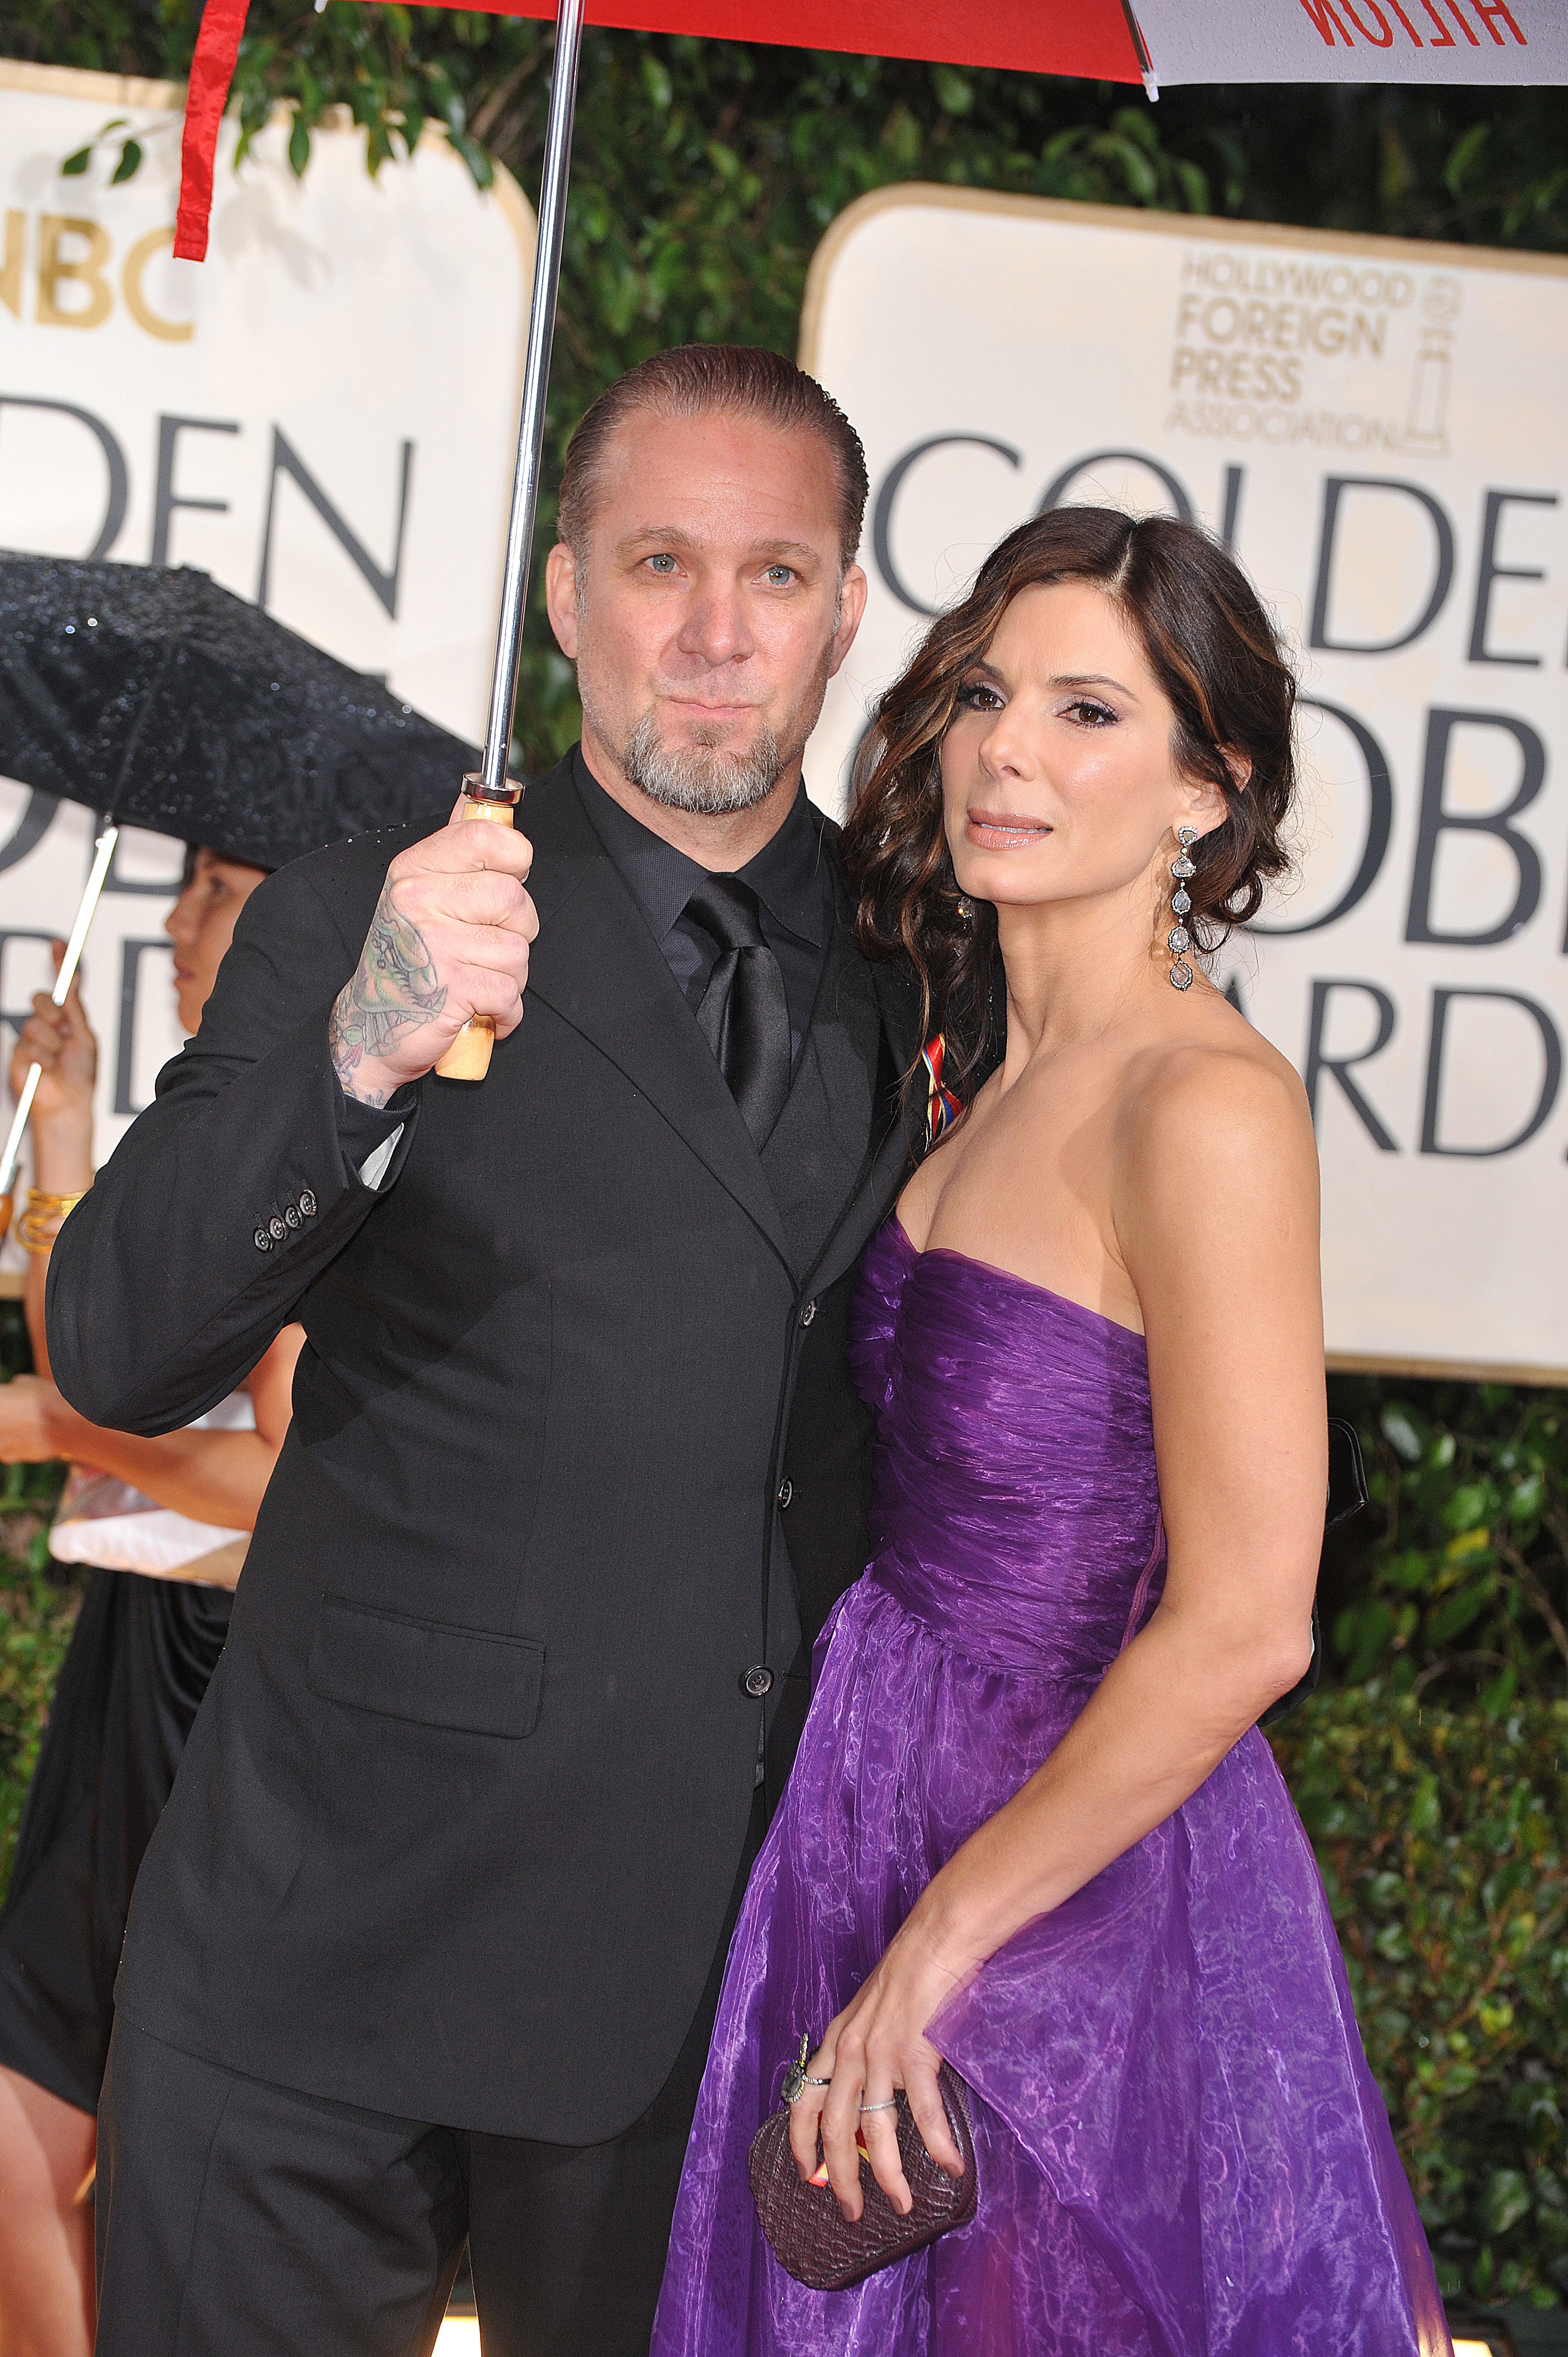 Jesse James and Sandra Bullock at the 67th Golden Globe Awards in Los Angeles on January 17, 2010. | Source: Getty Images